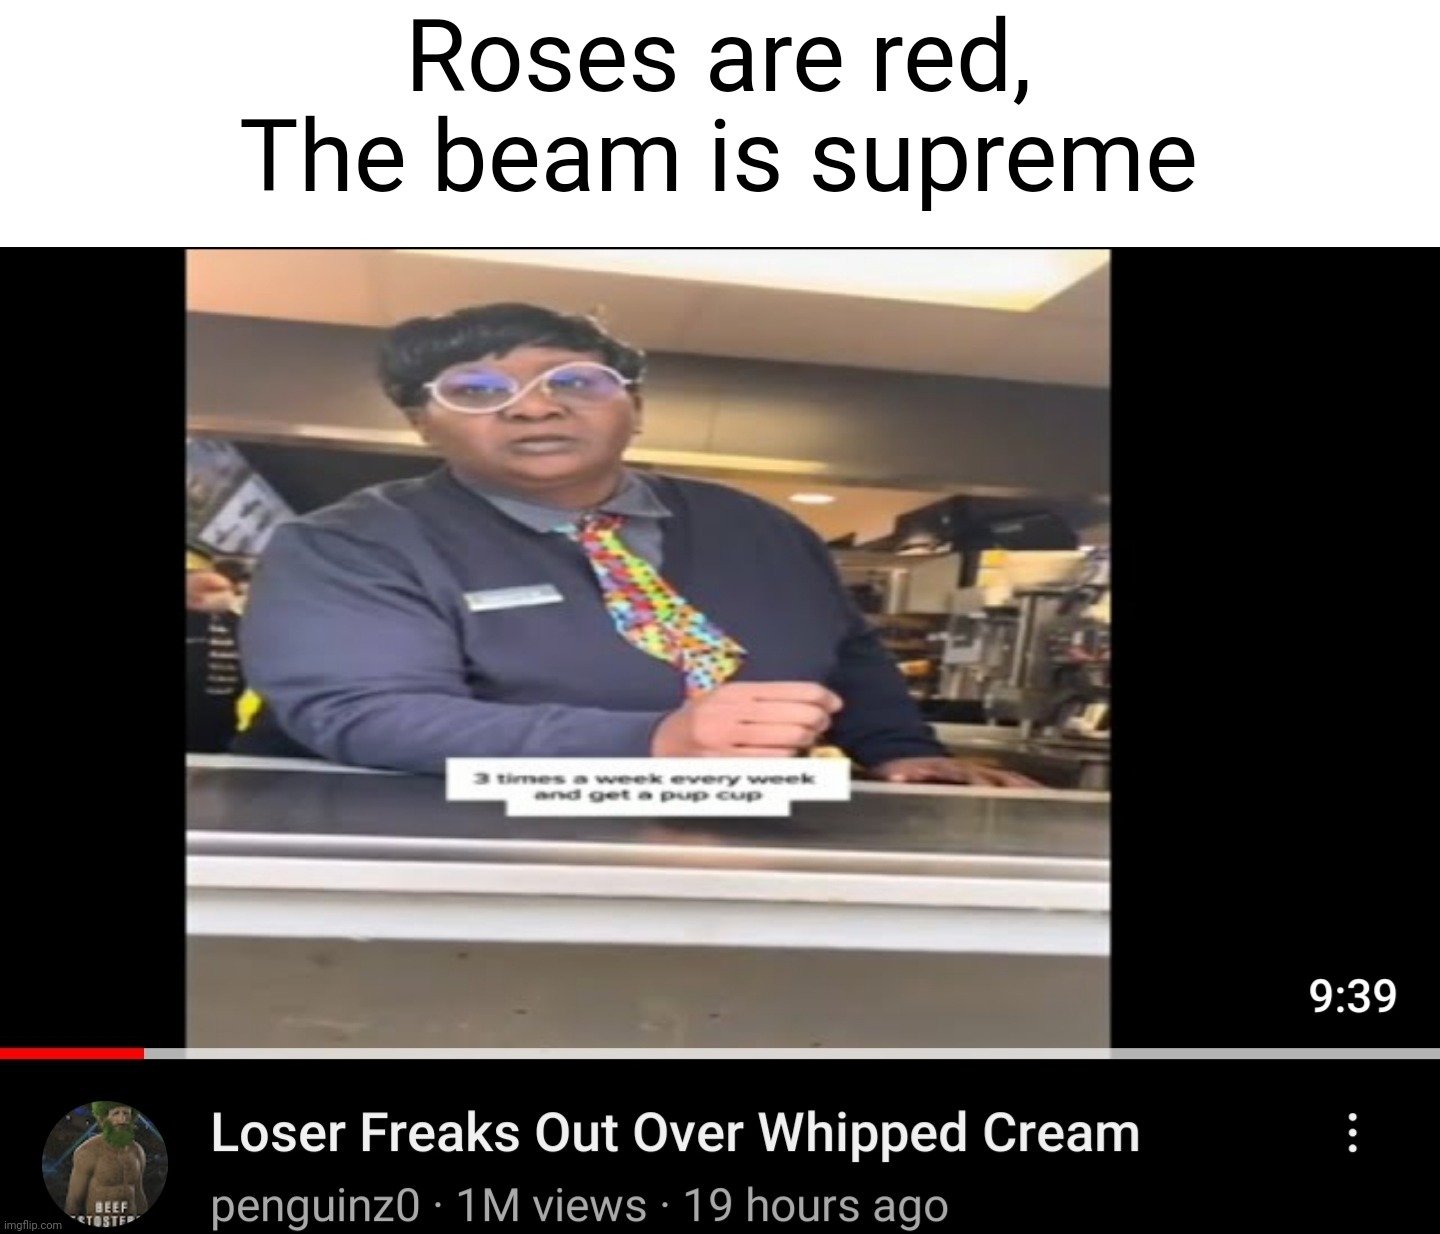 Imagine freaking out over whipped cream tho | Roses are red,
The beam is supreme | image tagged in memes,funny,roses are red,whipped cream | made w/ Imgflip meme maker